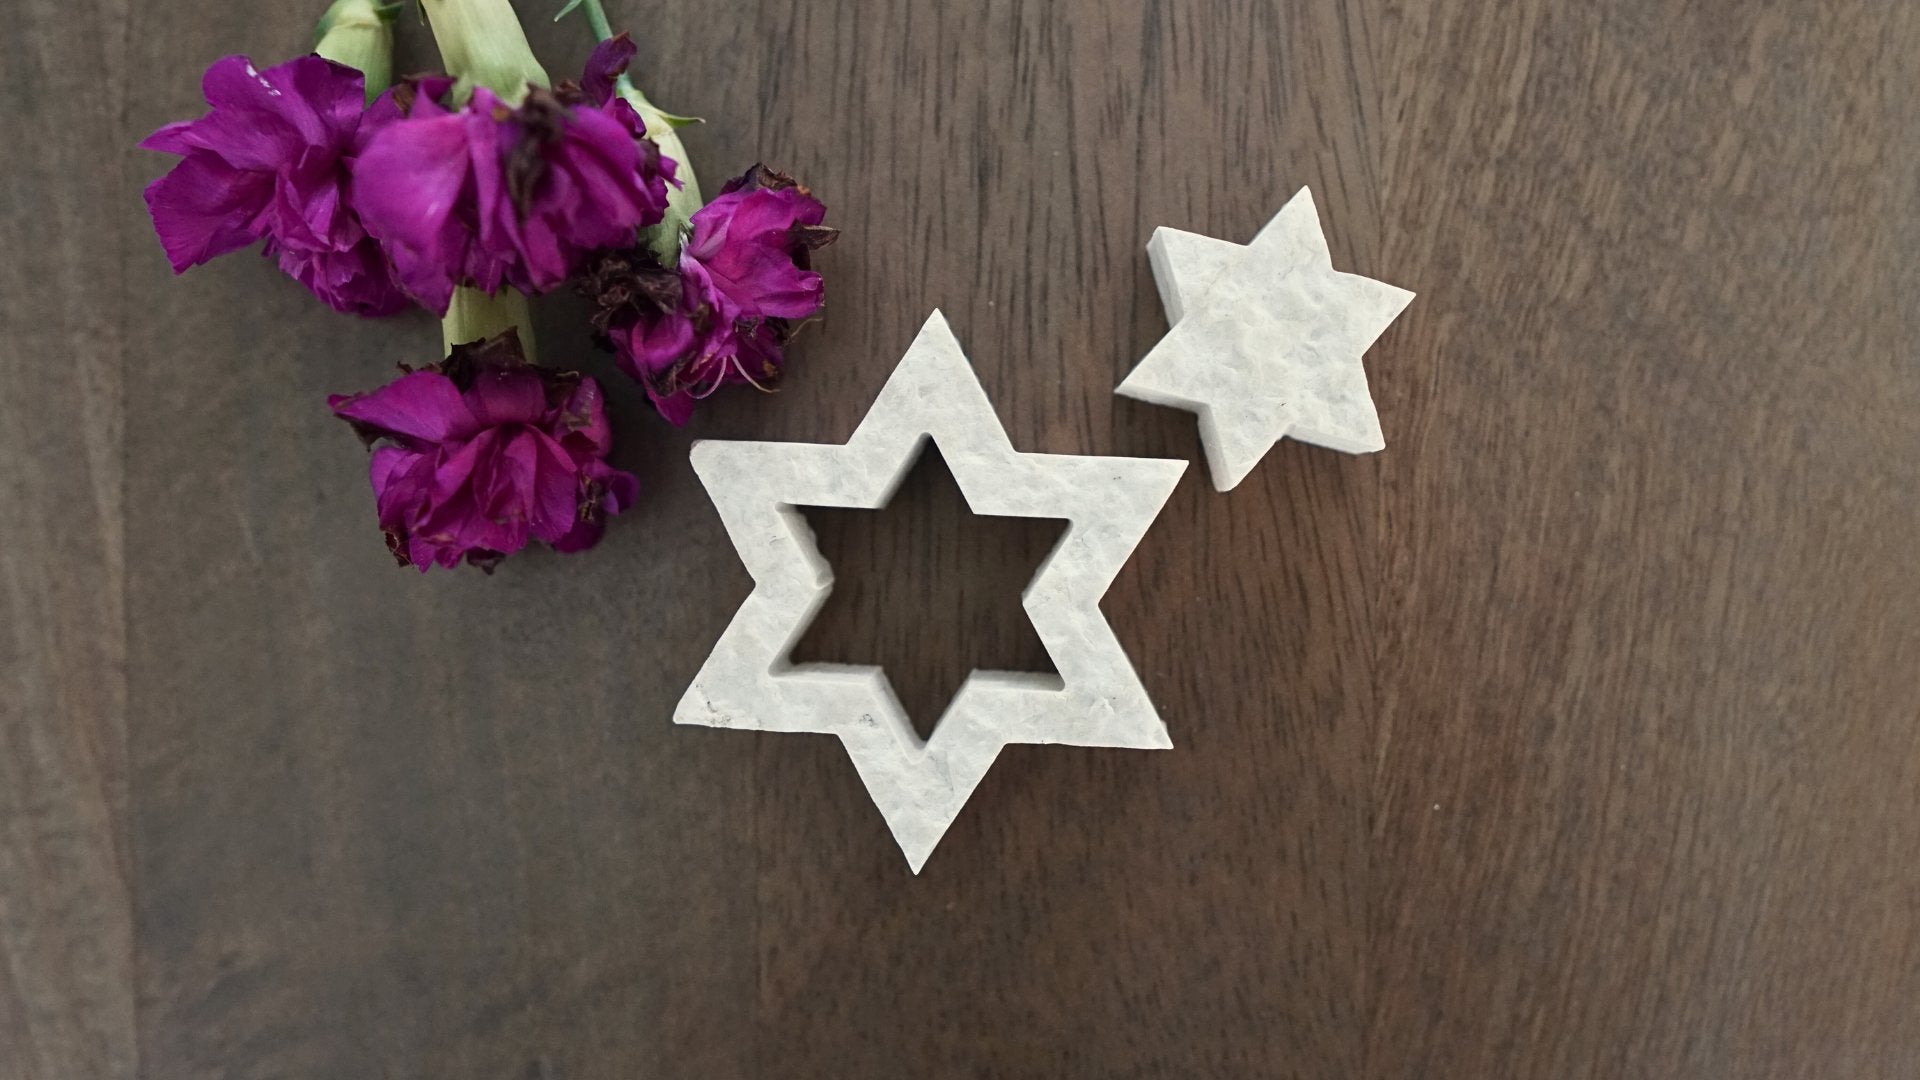 Star of David nesting stones on table with purple flowers